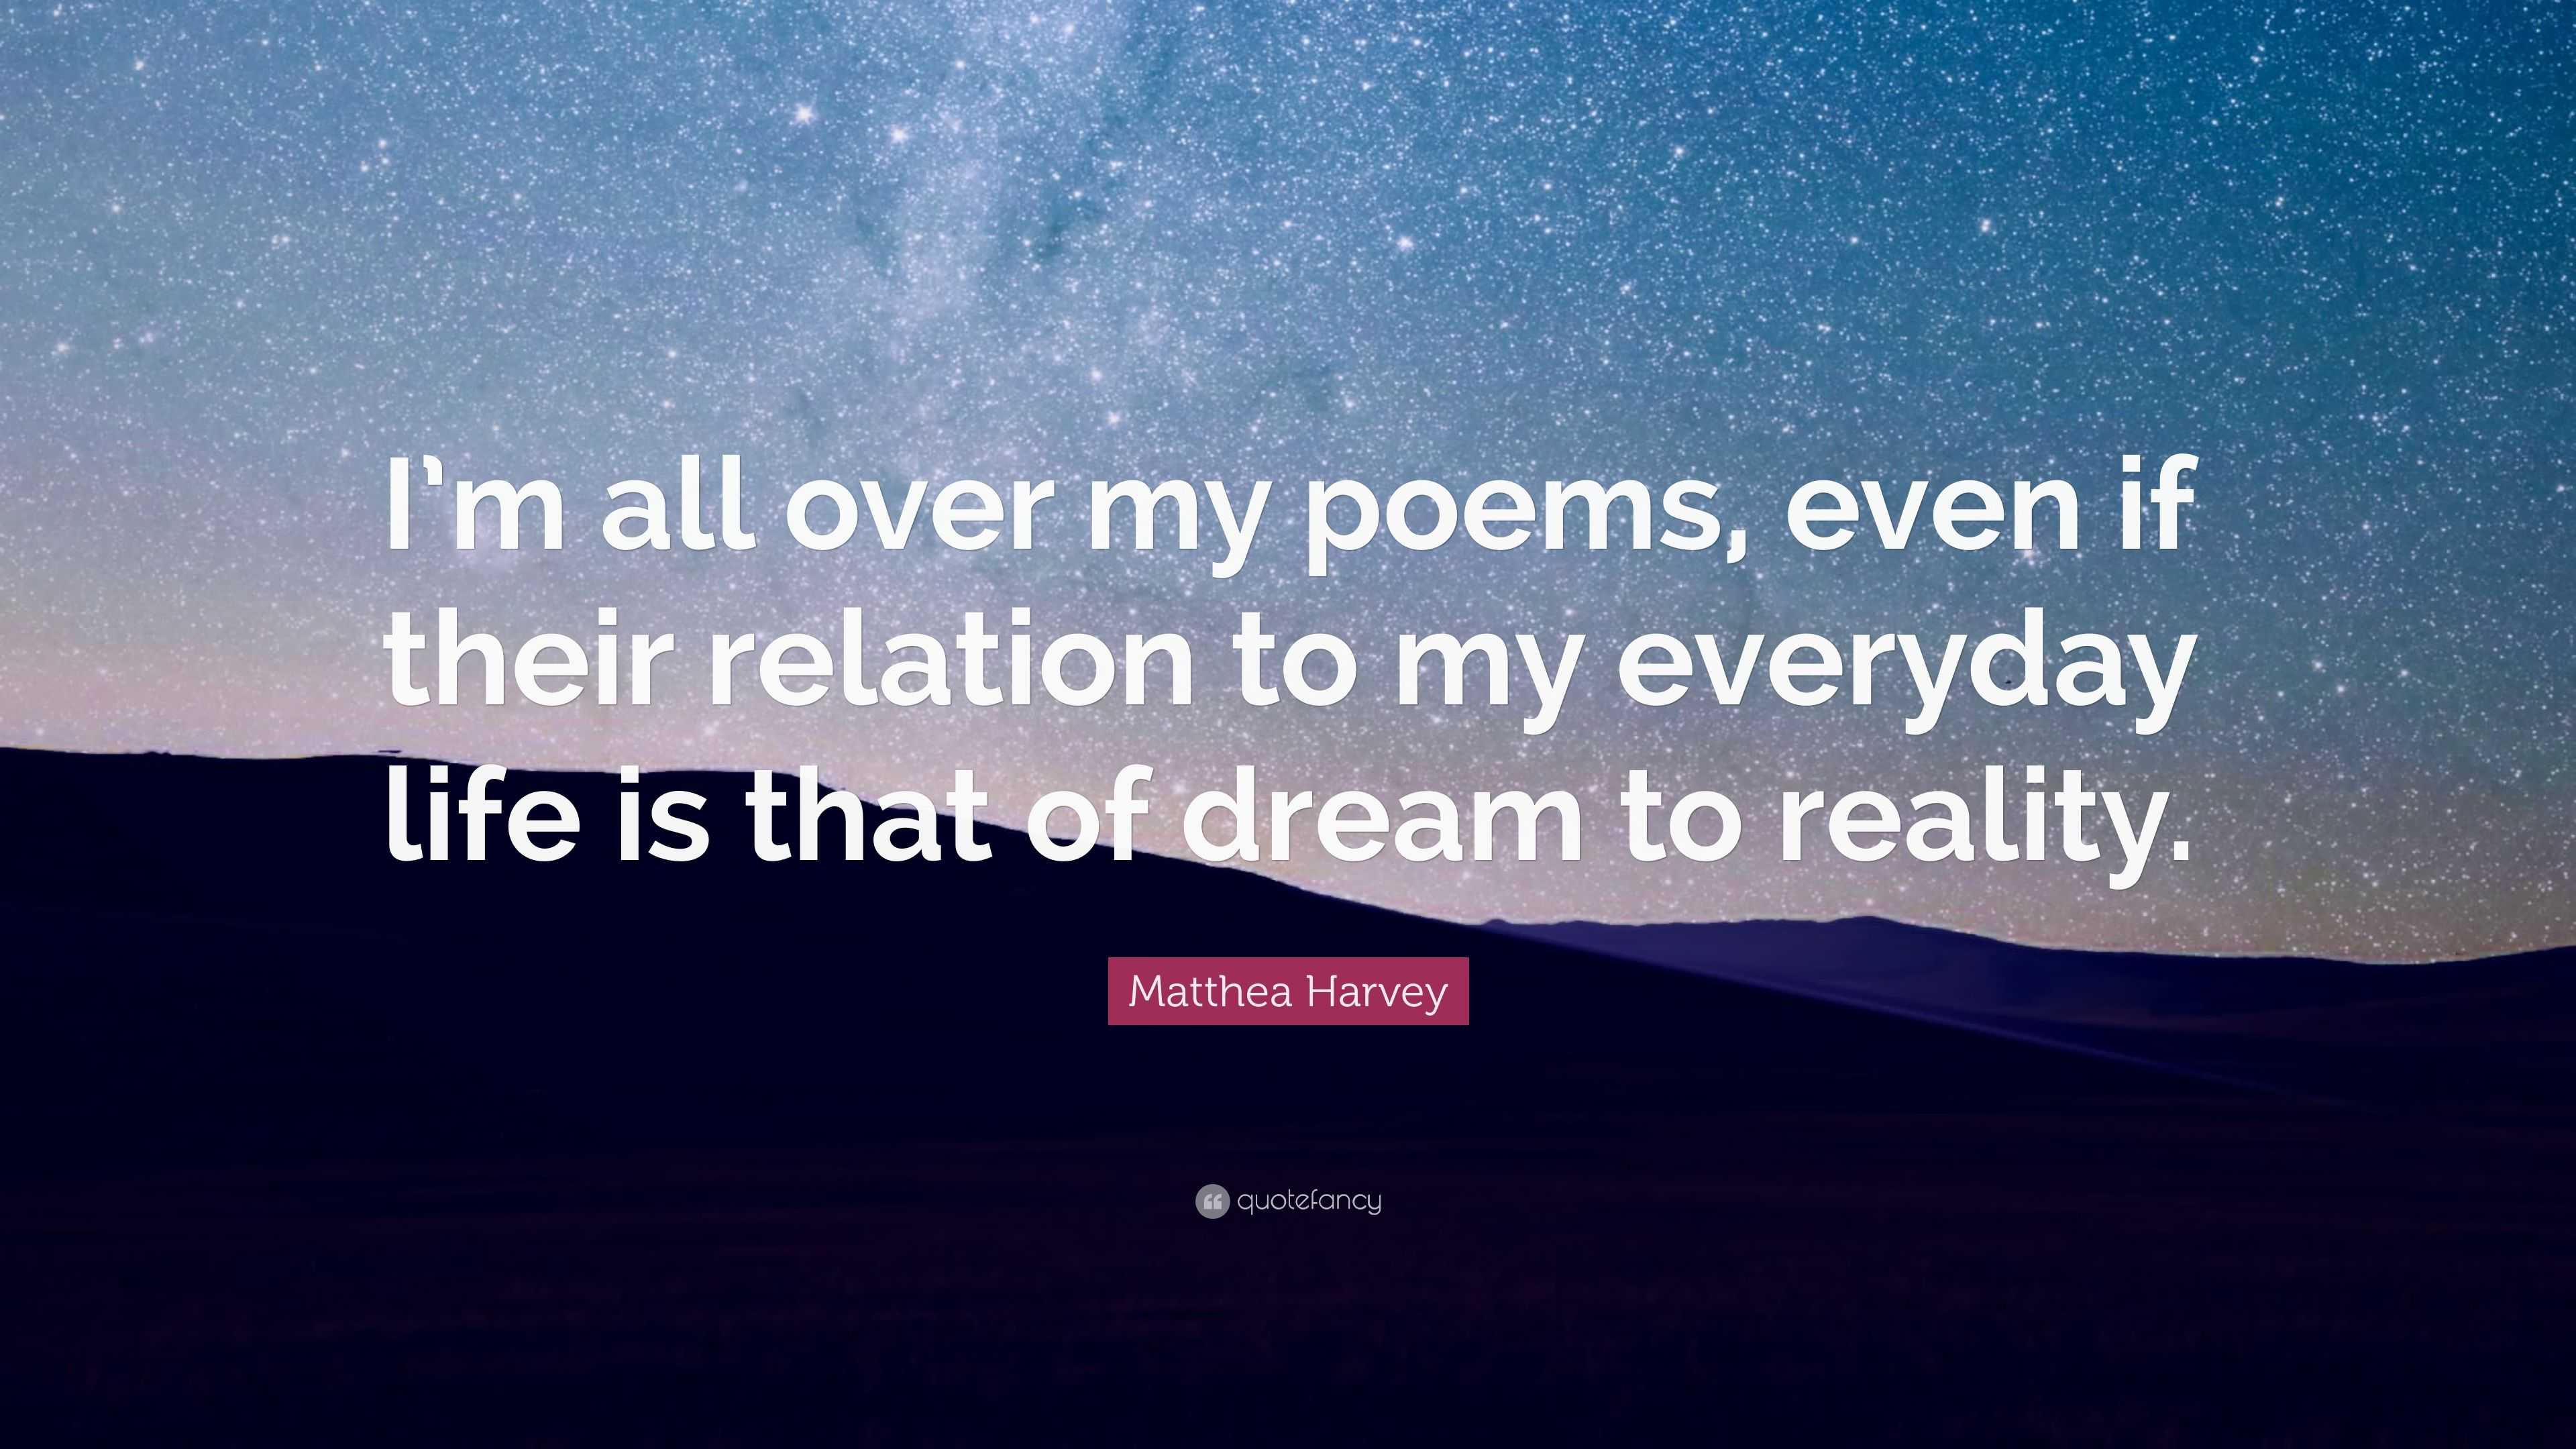 Matthea Harvey Quote: “I’m all over my poems, even if their relation to ...